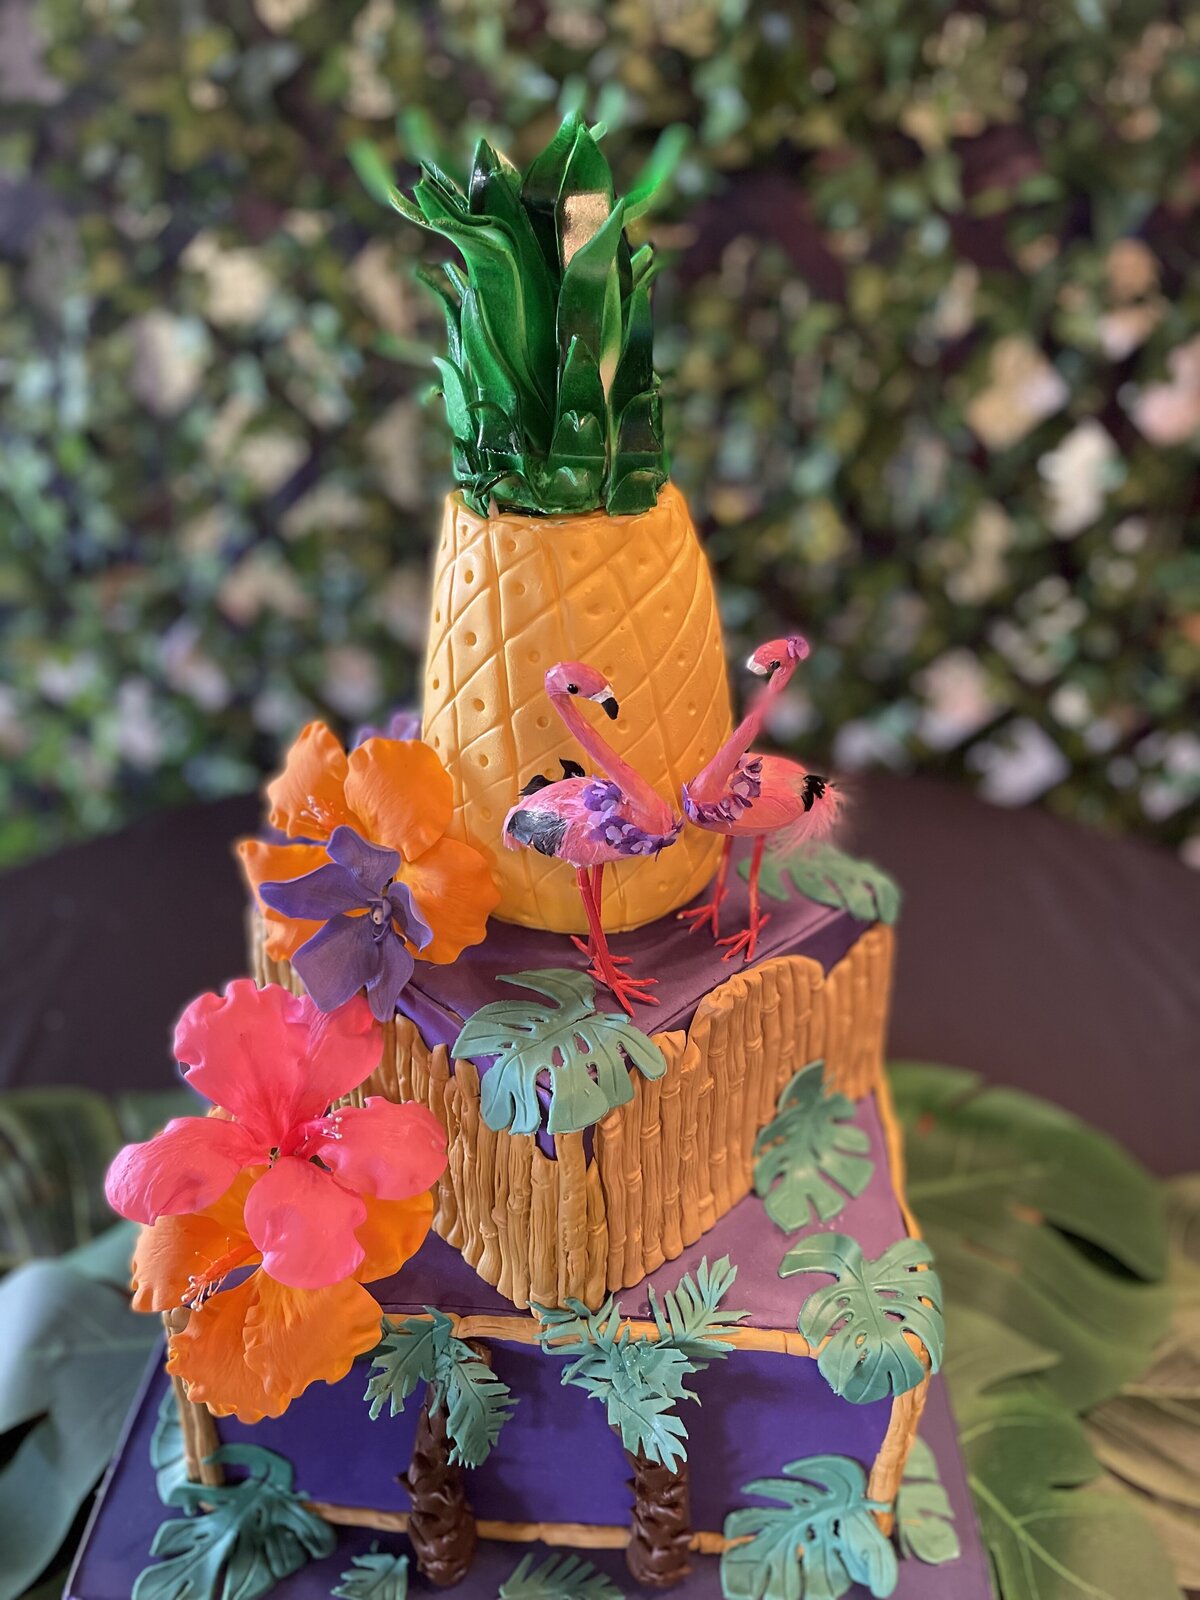 Tropical theme 3 tier wedding cake. Bottom tier is deep purple square with Monestera leaves, plam treese and bamboo edges; middle tier is square with bamboo  and cascading pink and orange hibiscus ; purple call lilies, purple orchids dnd pink flamingos. Top tier is carved pineapple.